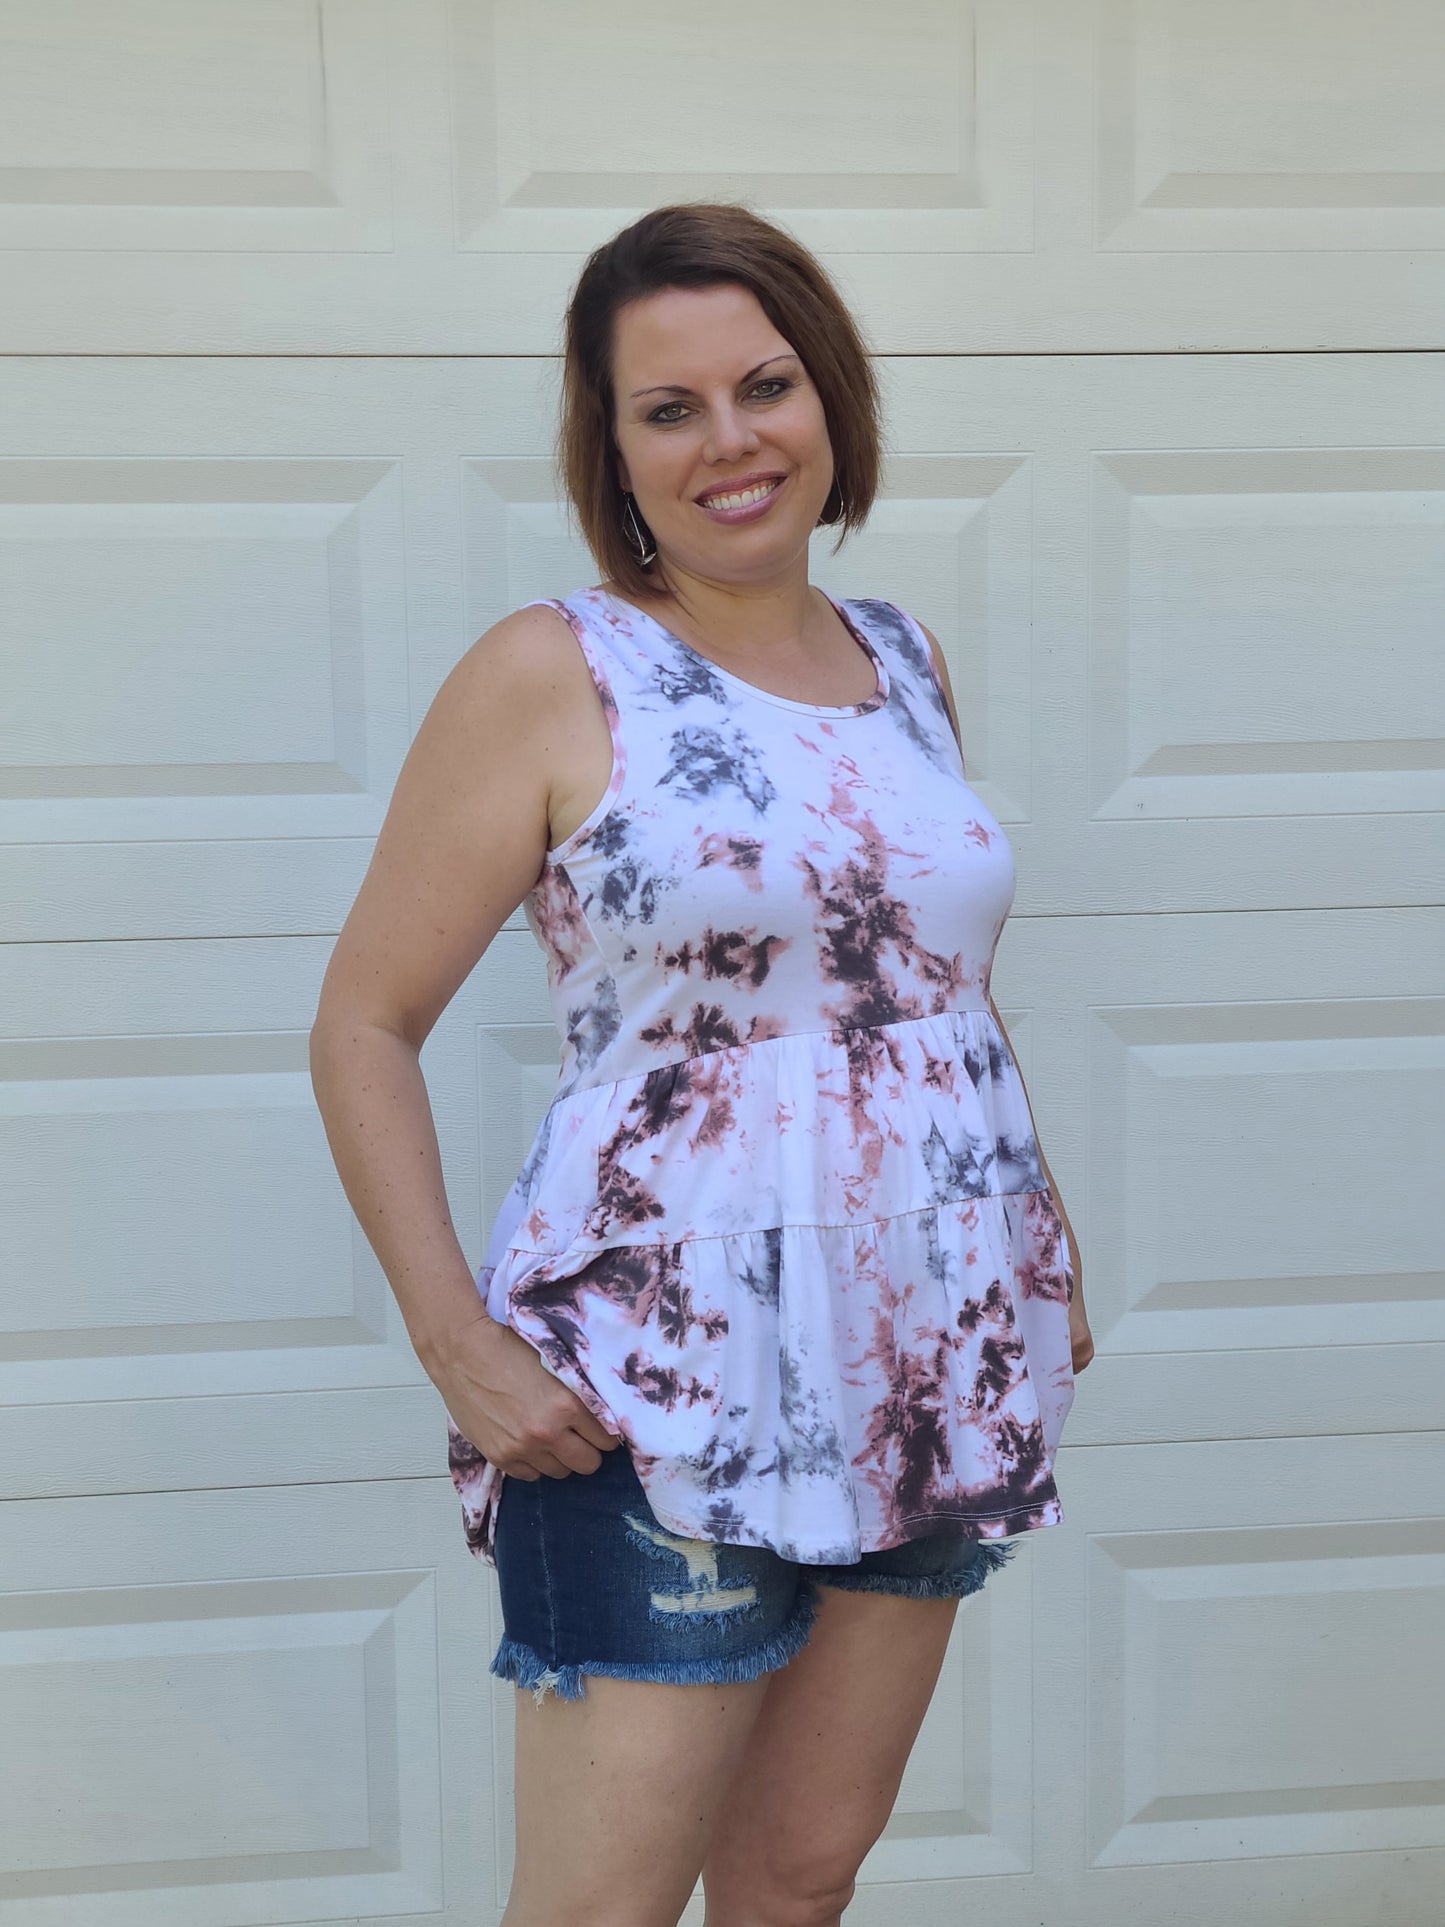 This sleeveless top is super fun and super soft, which is just what we want all of our summer tanks to be! The details include a scooped neckline, and this top is casual, comfortable and cute. Pair this top with jeans or shorts for an effortlessly chic and fun look!